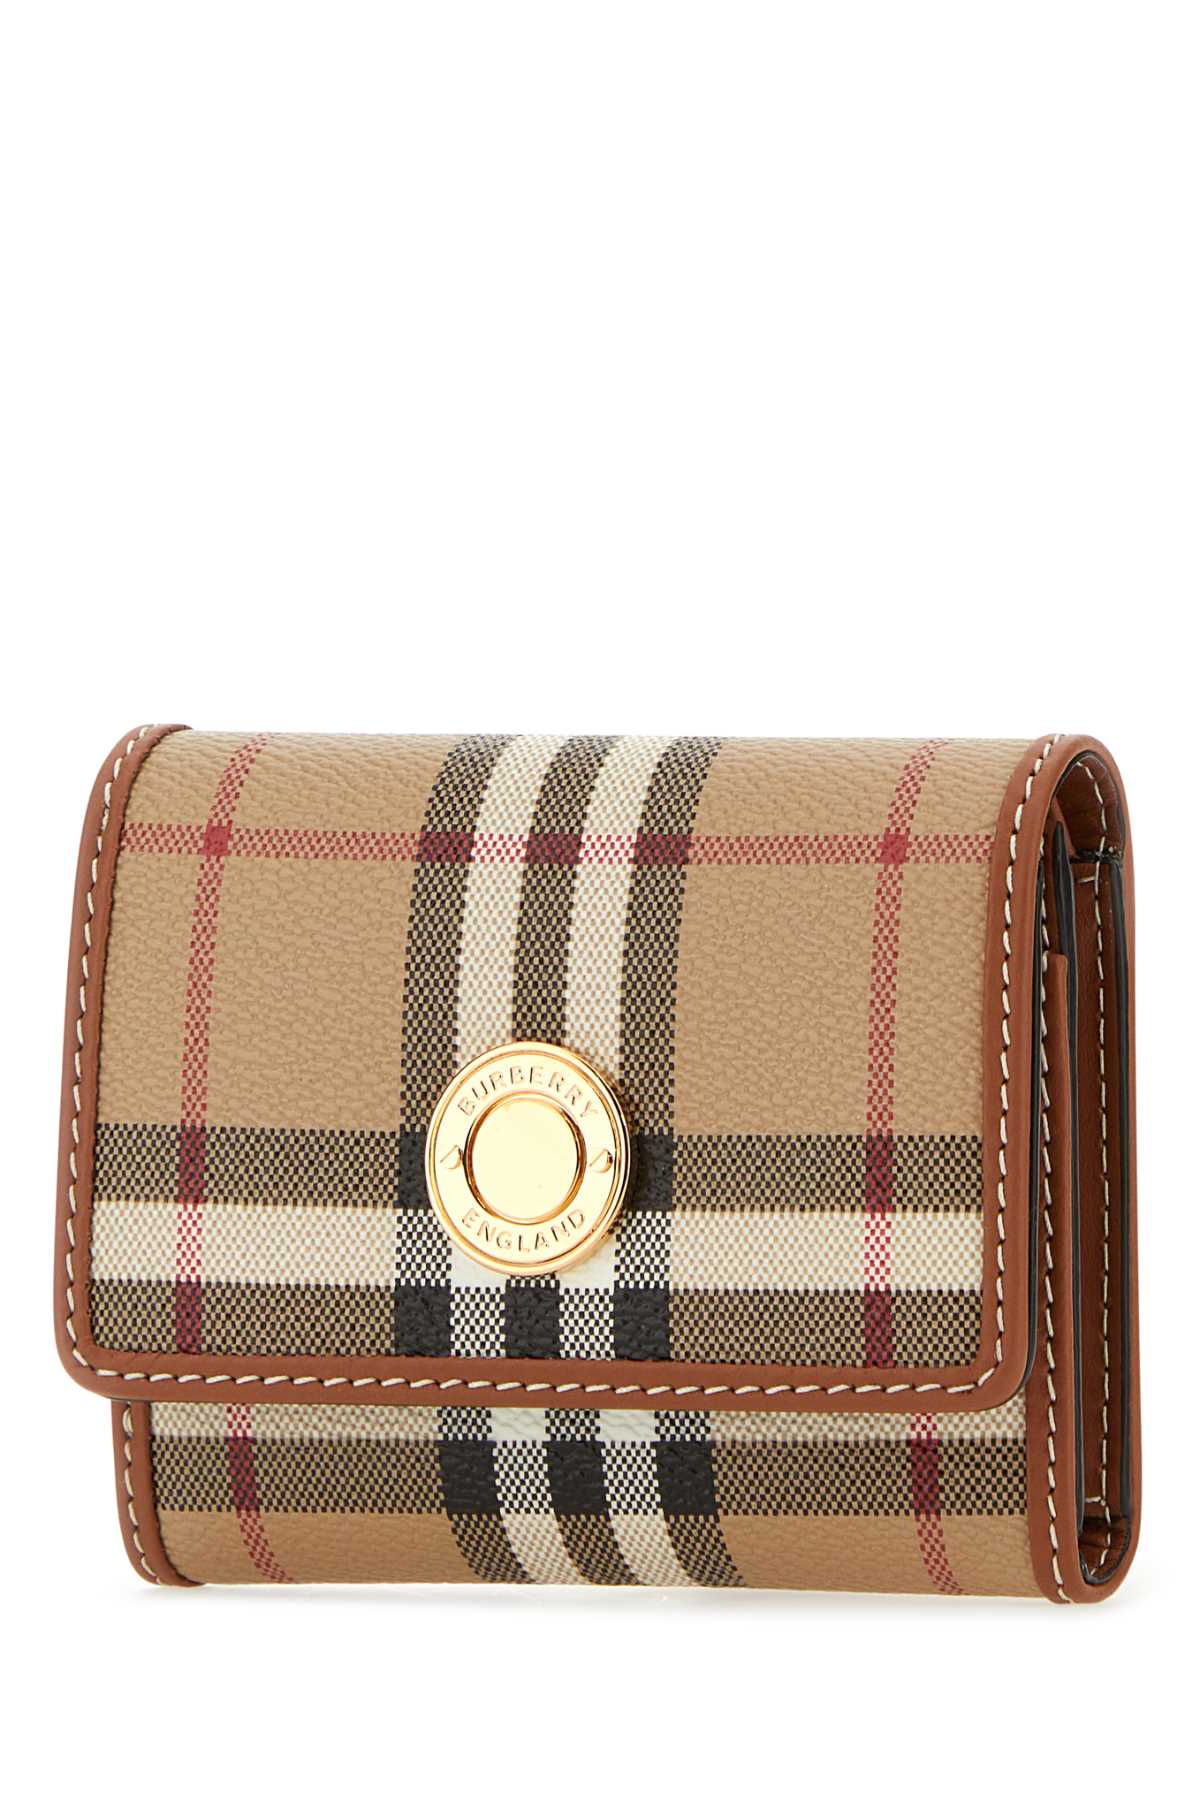 Shop Burberry Printed Canvas And Leather Small Wallet In Archivebeige